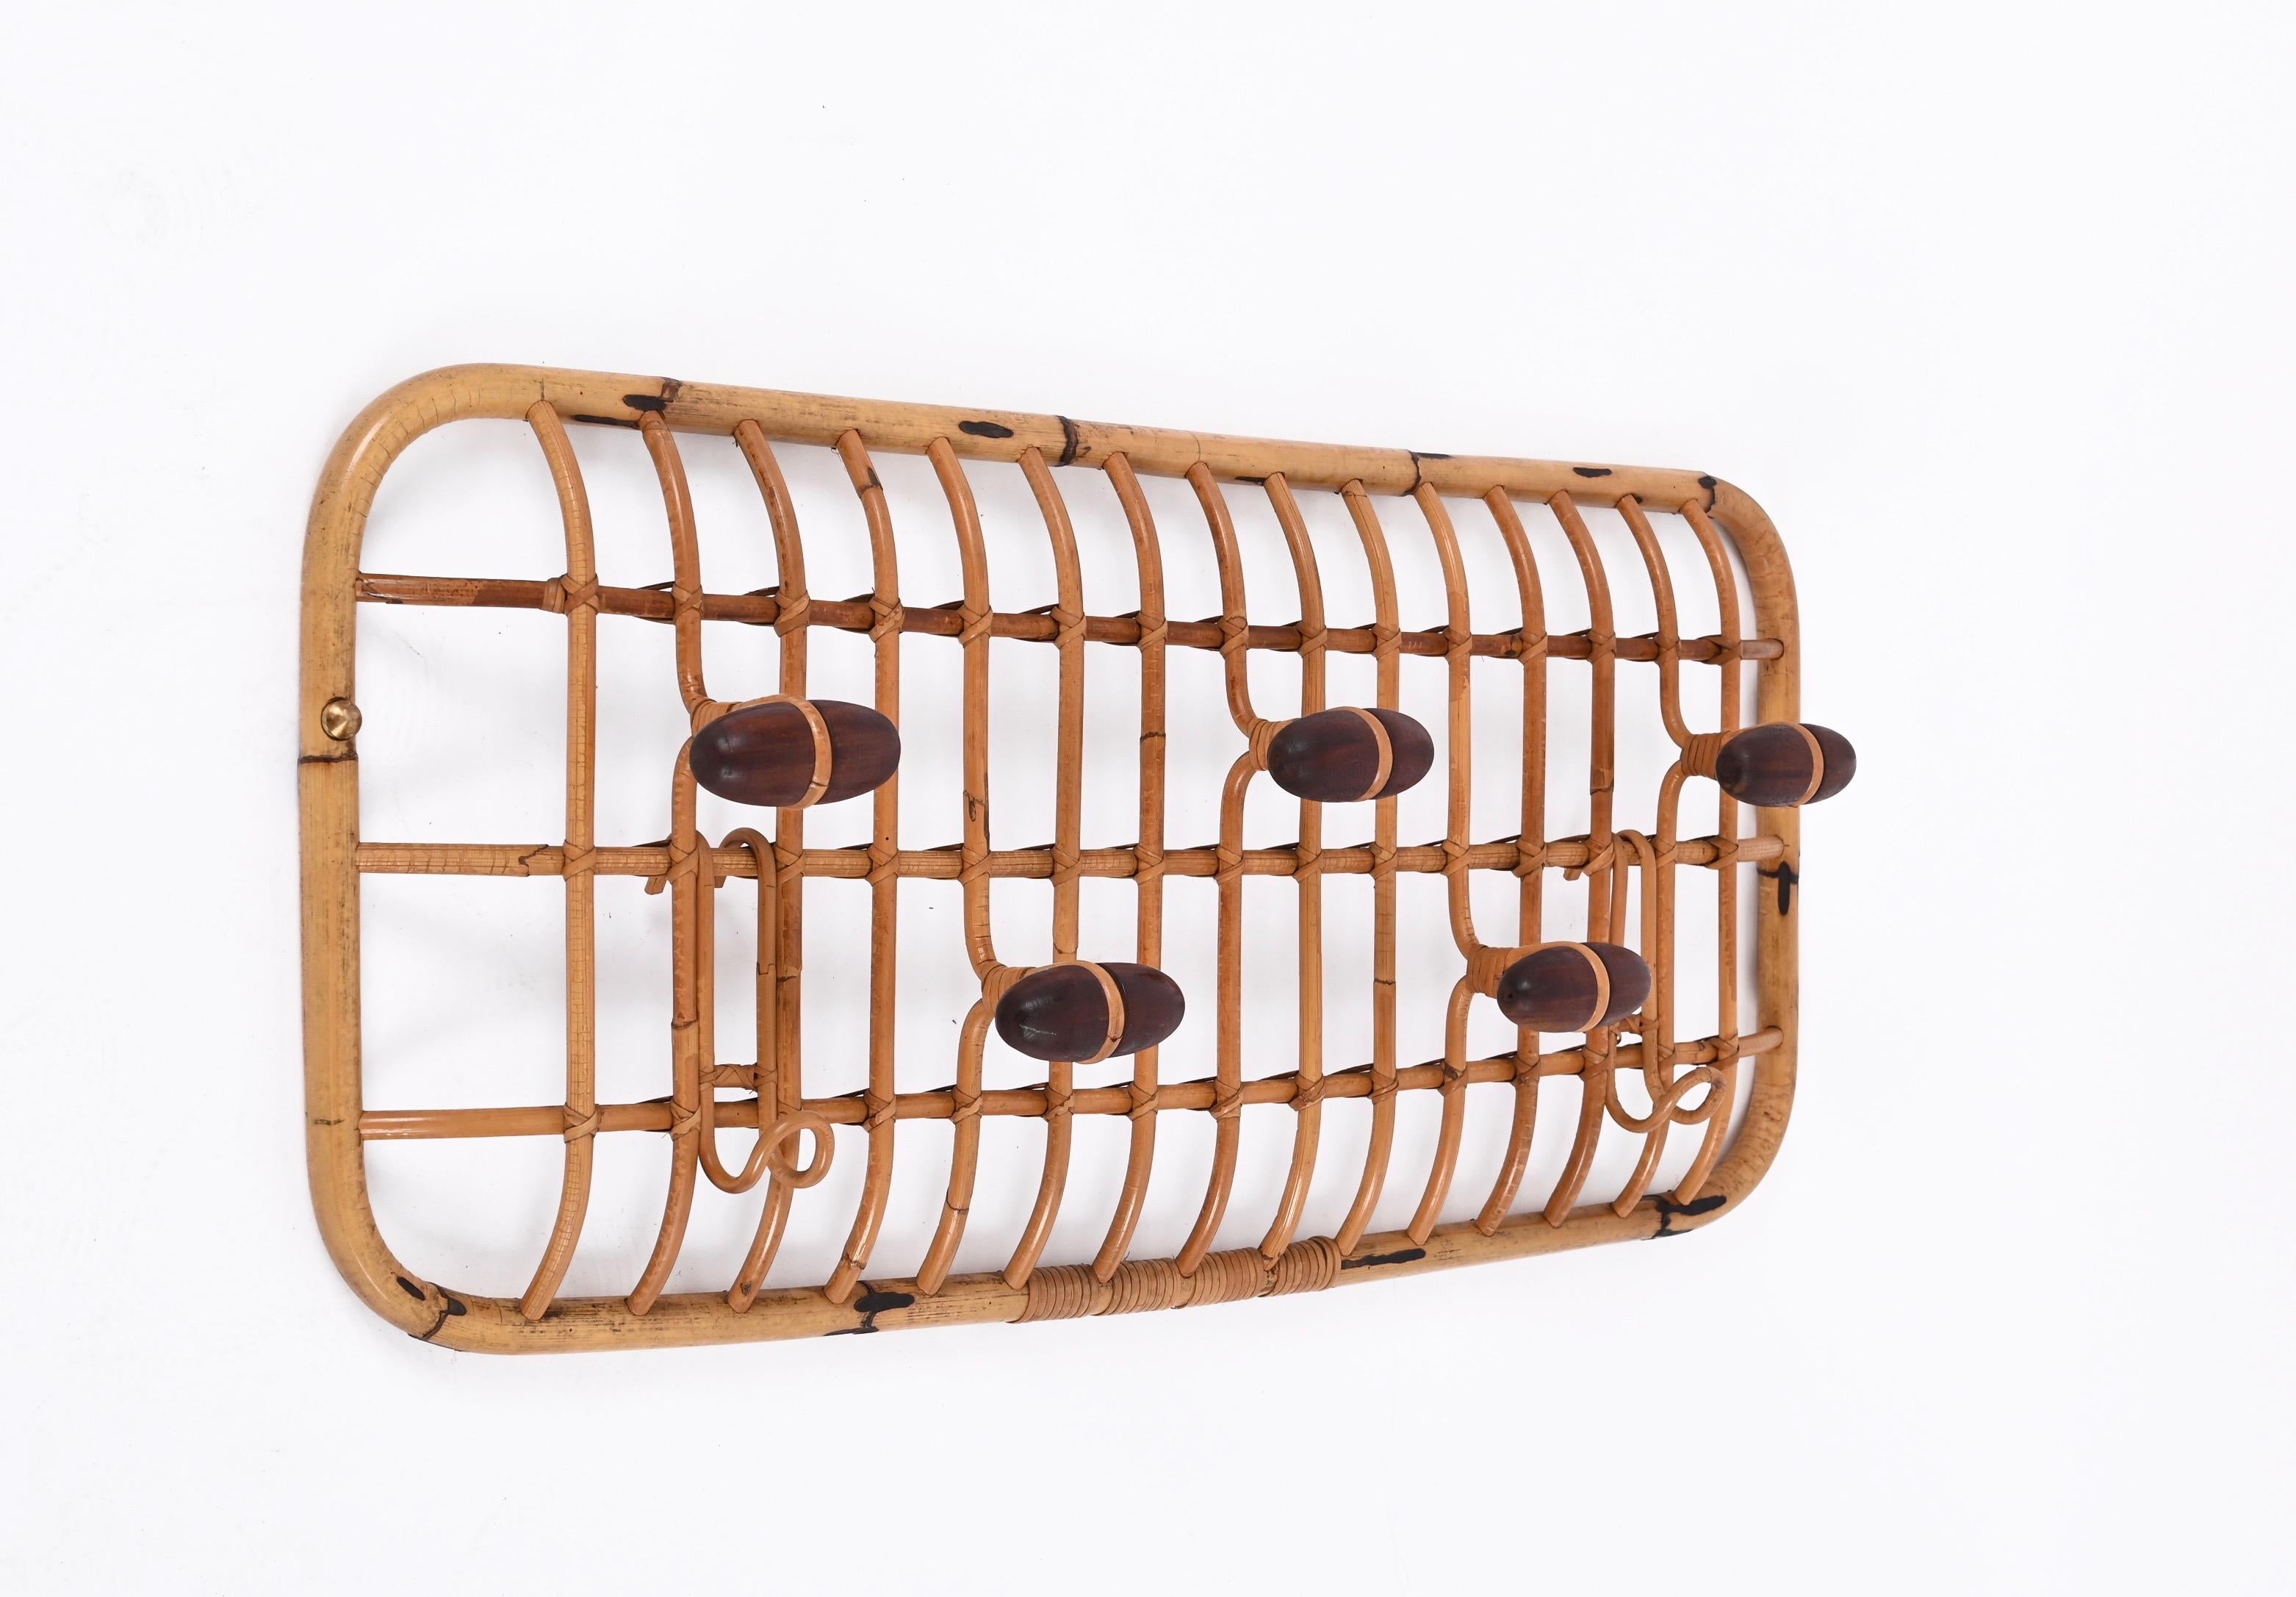 Gorgeous midcentury coat rack in bamboo, rattan and walnut wood by Olaf von Bohr for Bonacina, produced in the 1960s in Italy.

This iconic piece features a bamboo and rattan structure with five hangers in dark walnut wood and two curved bamboo